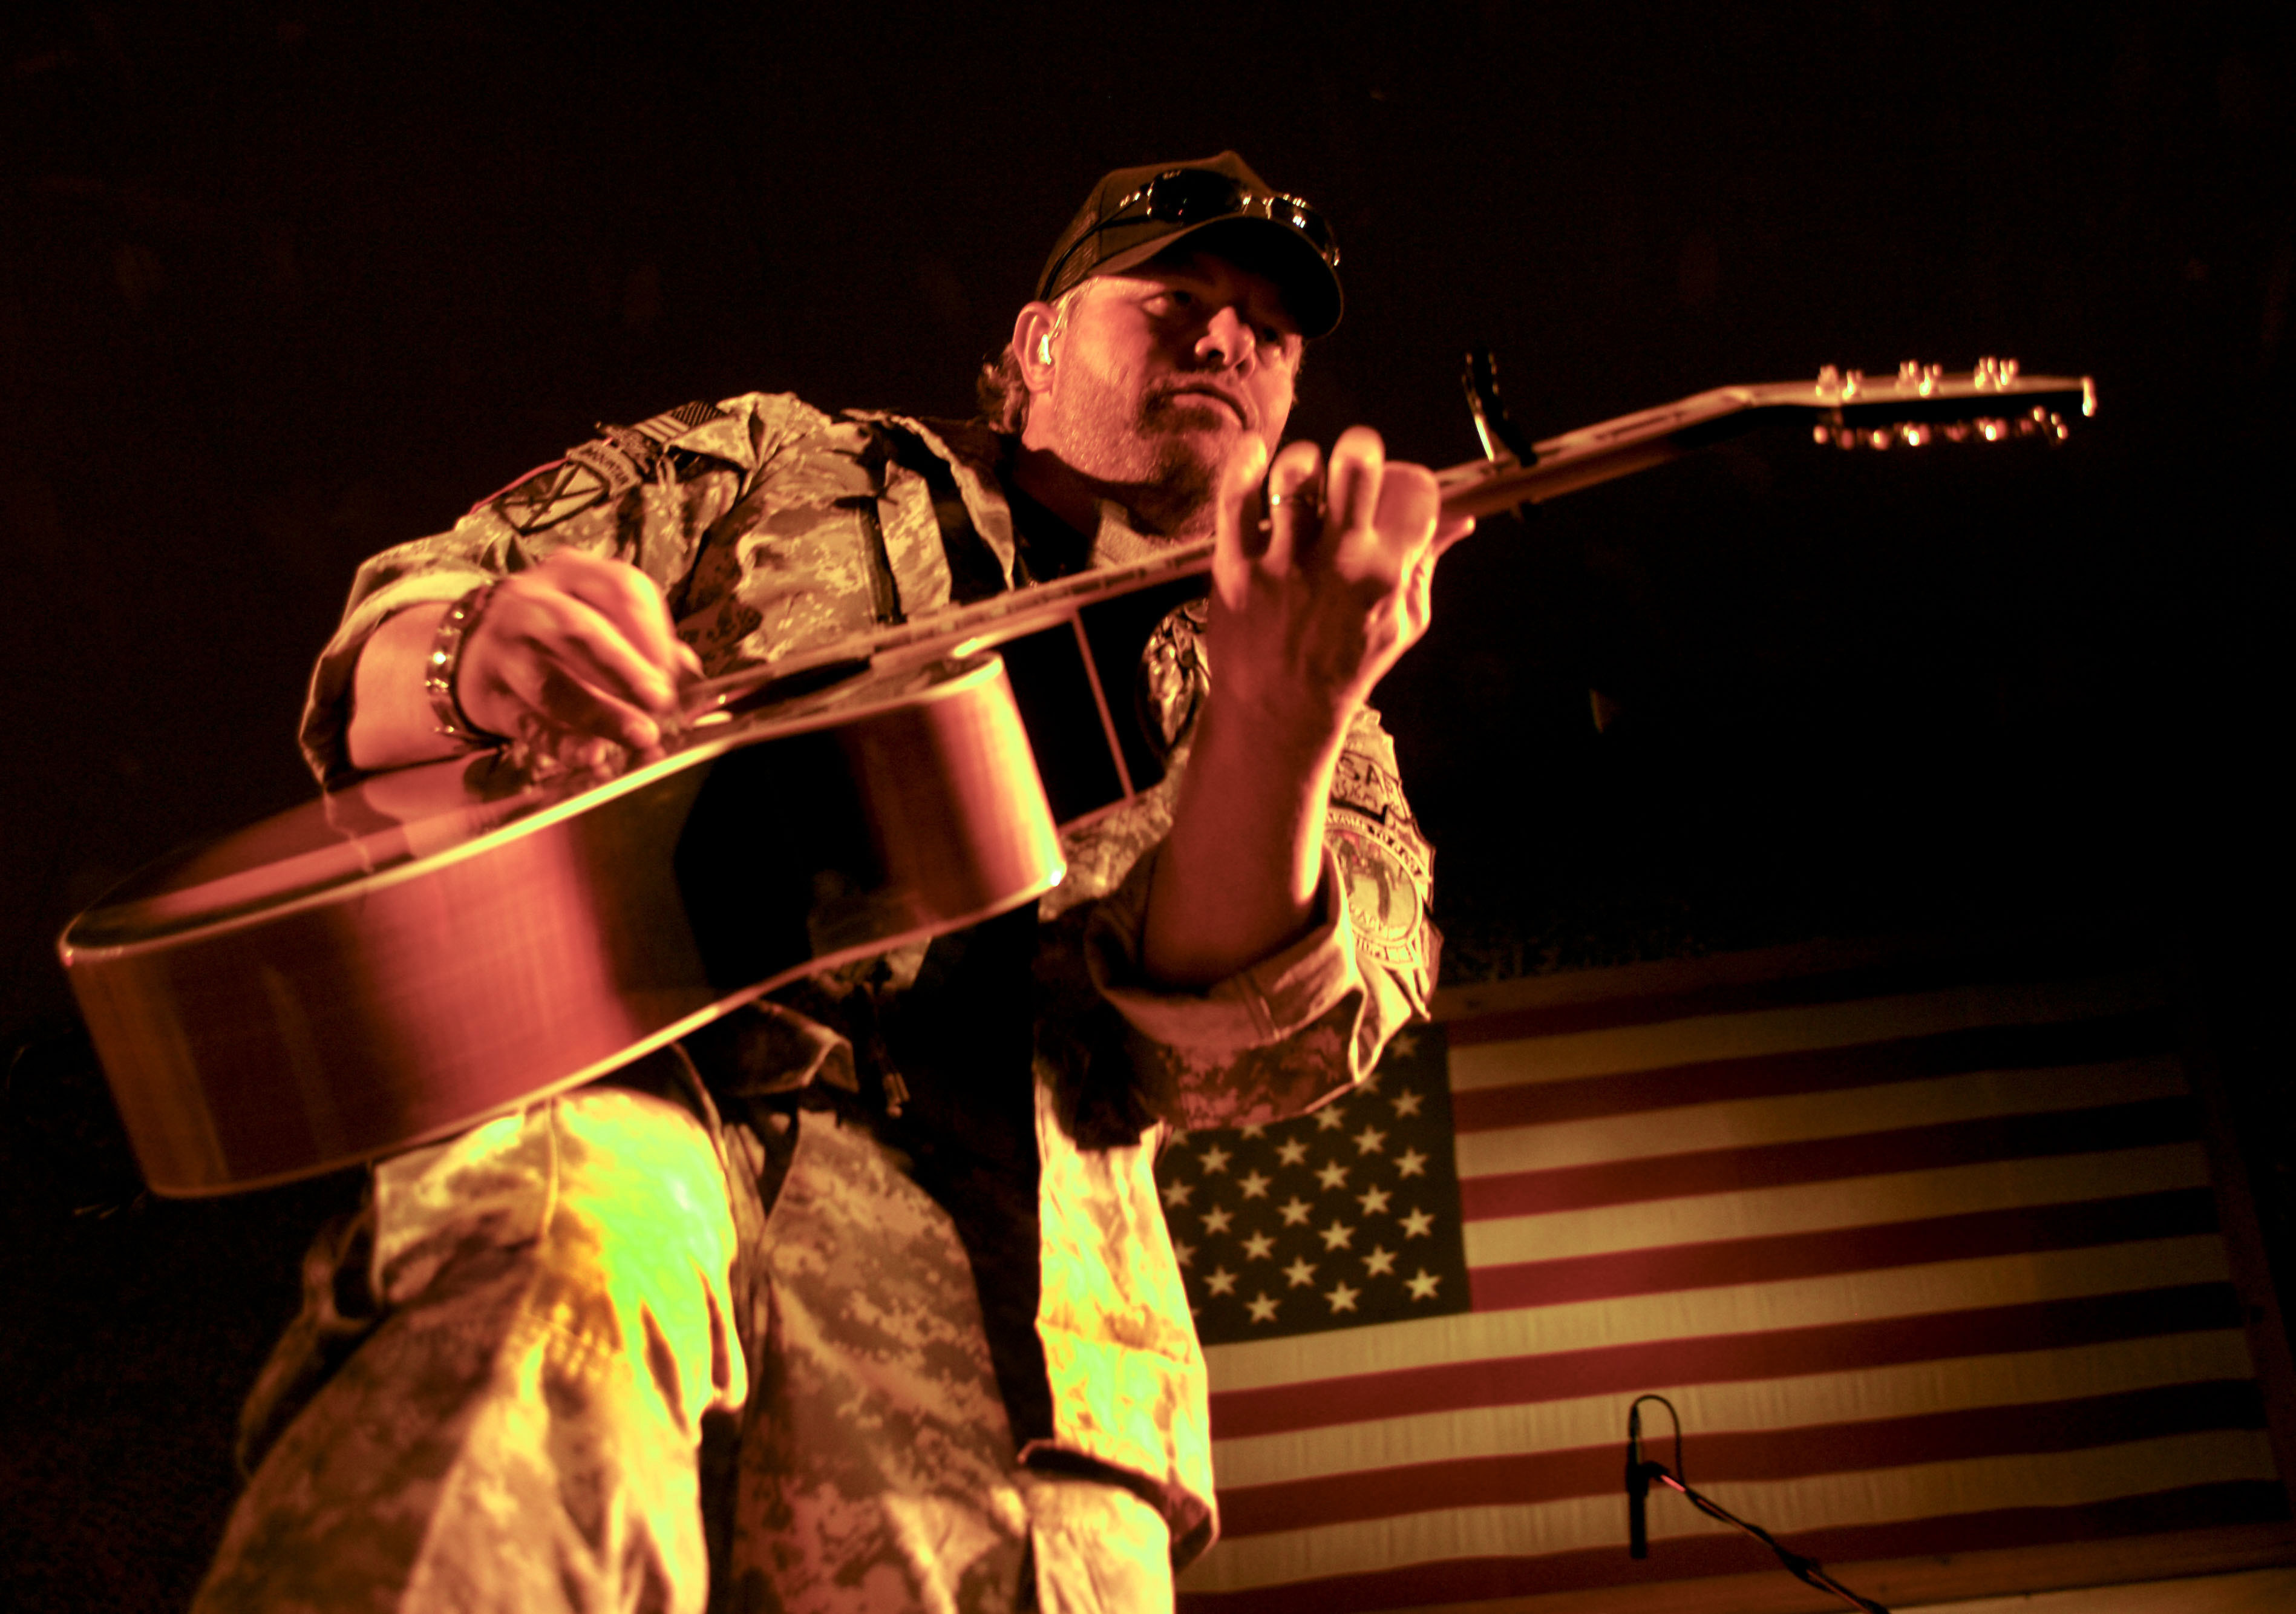 Toby Keith visits Bagram for USO tour > U.S. Air Forces Central > Display